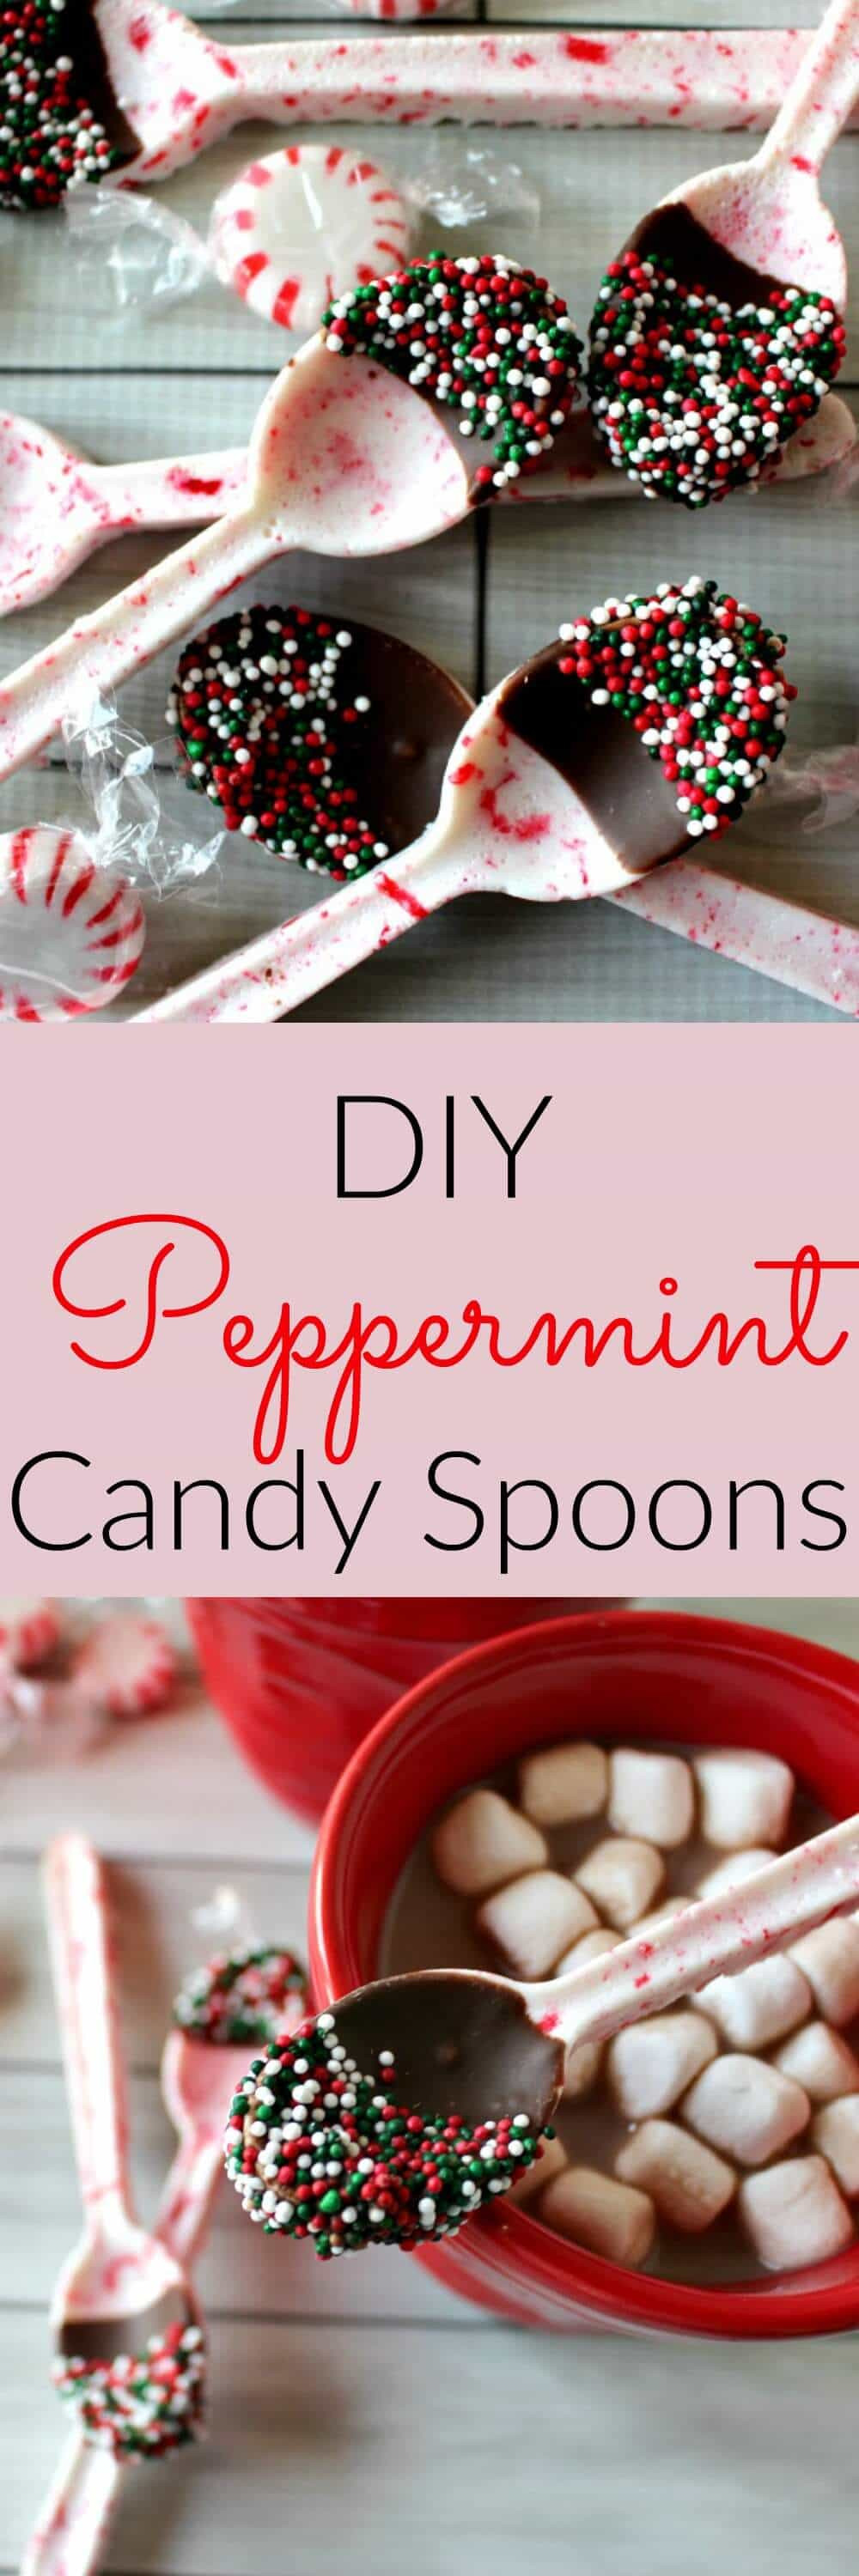 Simple DIY Christmas Gifts
 DIY Peppermint Candy Spoons Princess Pinky Girl